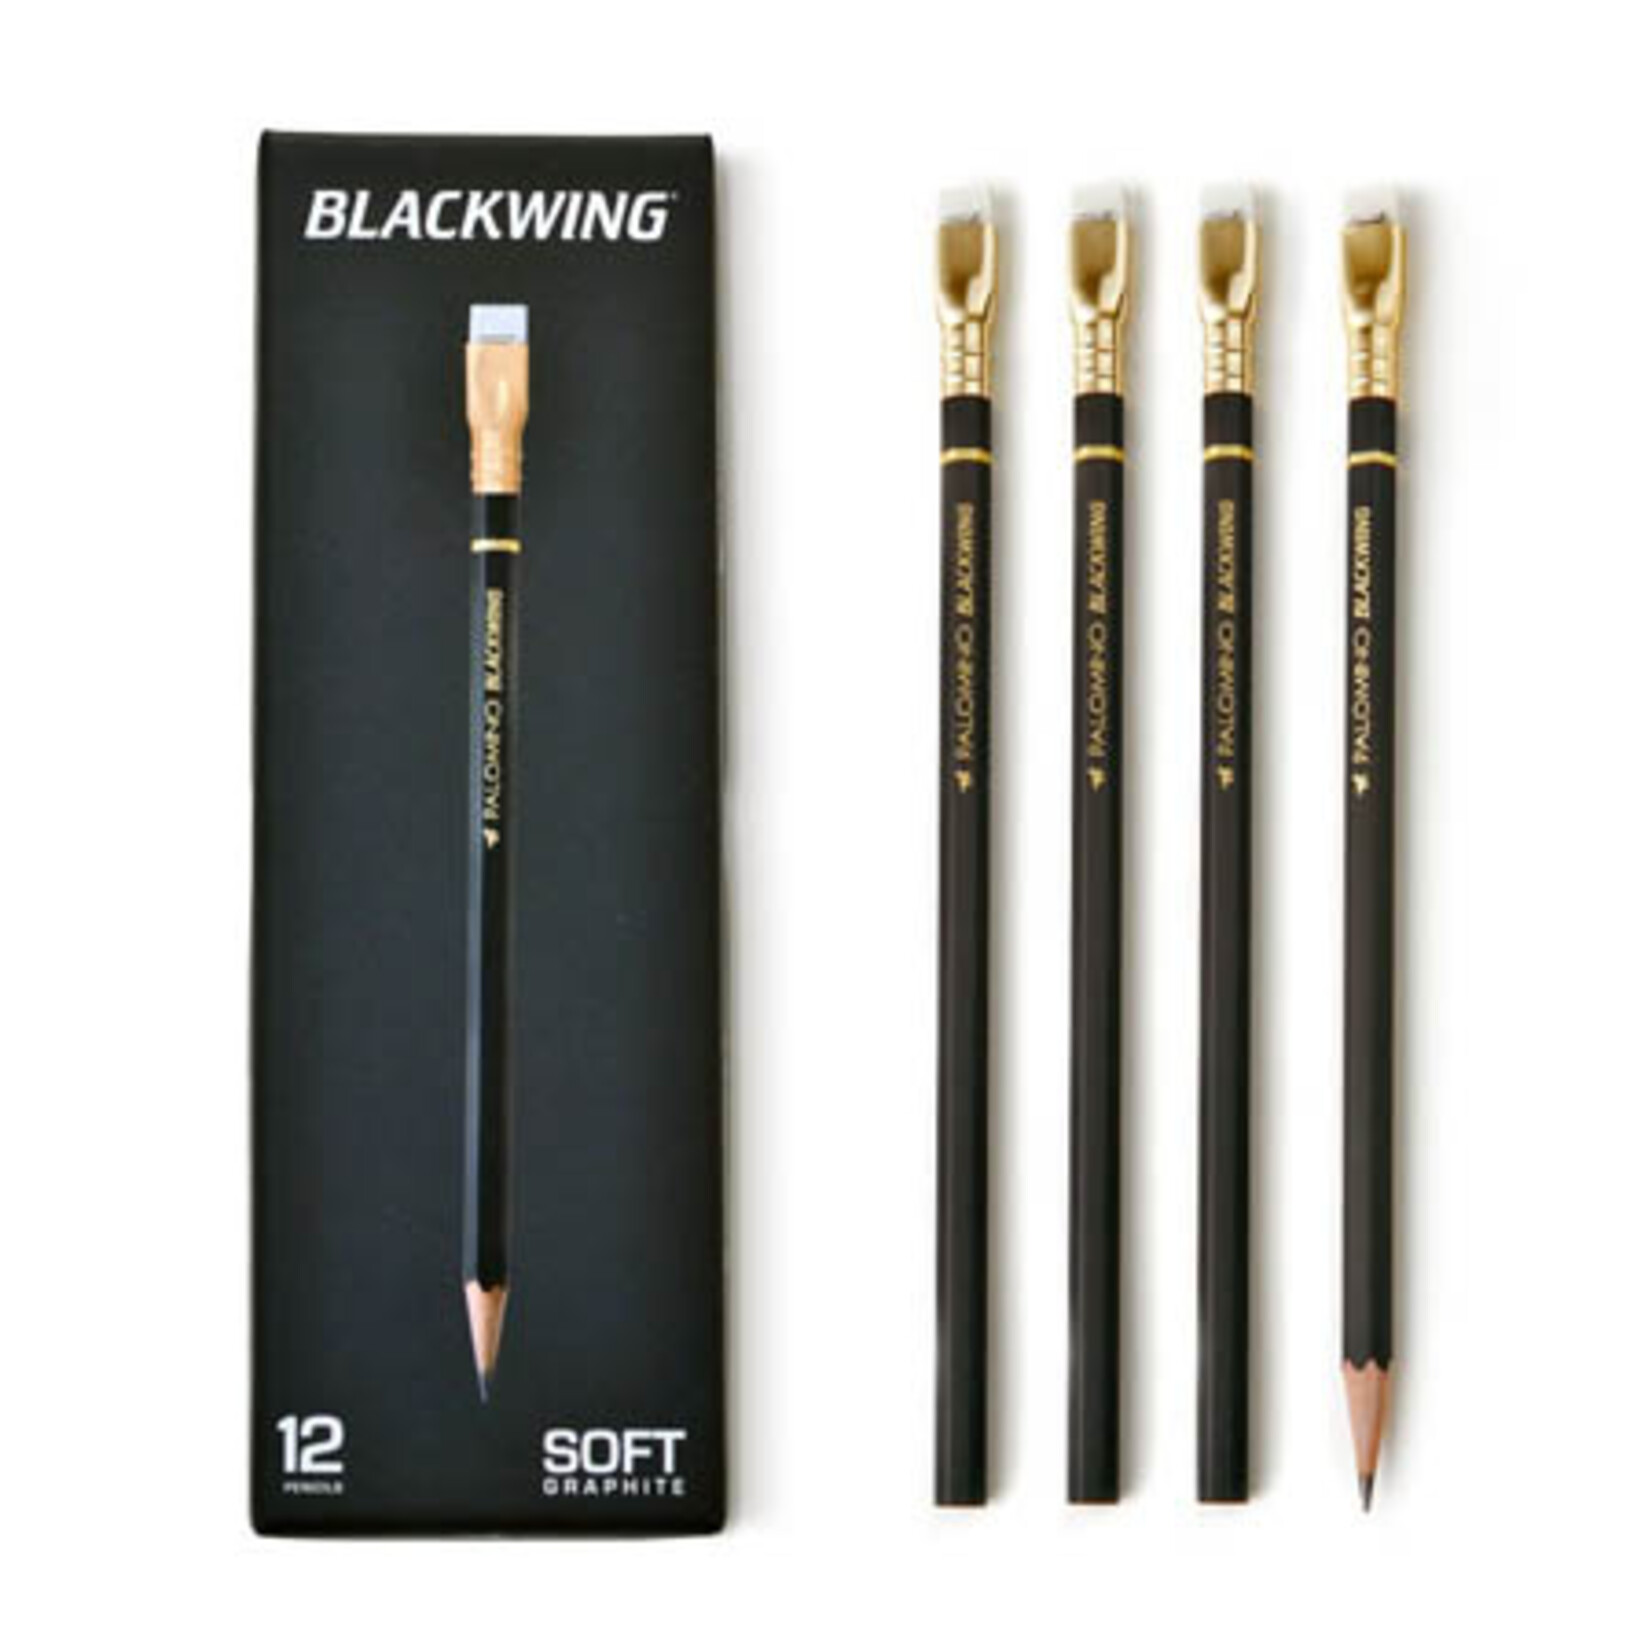 Blackwing 602 Firm and Smooth Pencils, 12 pack